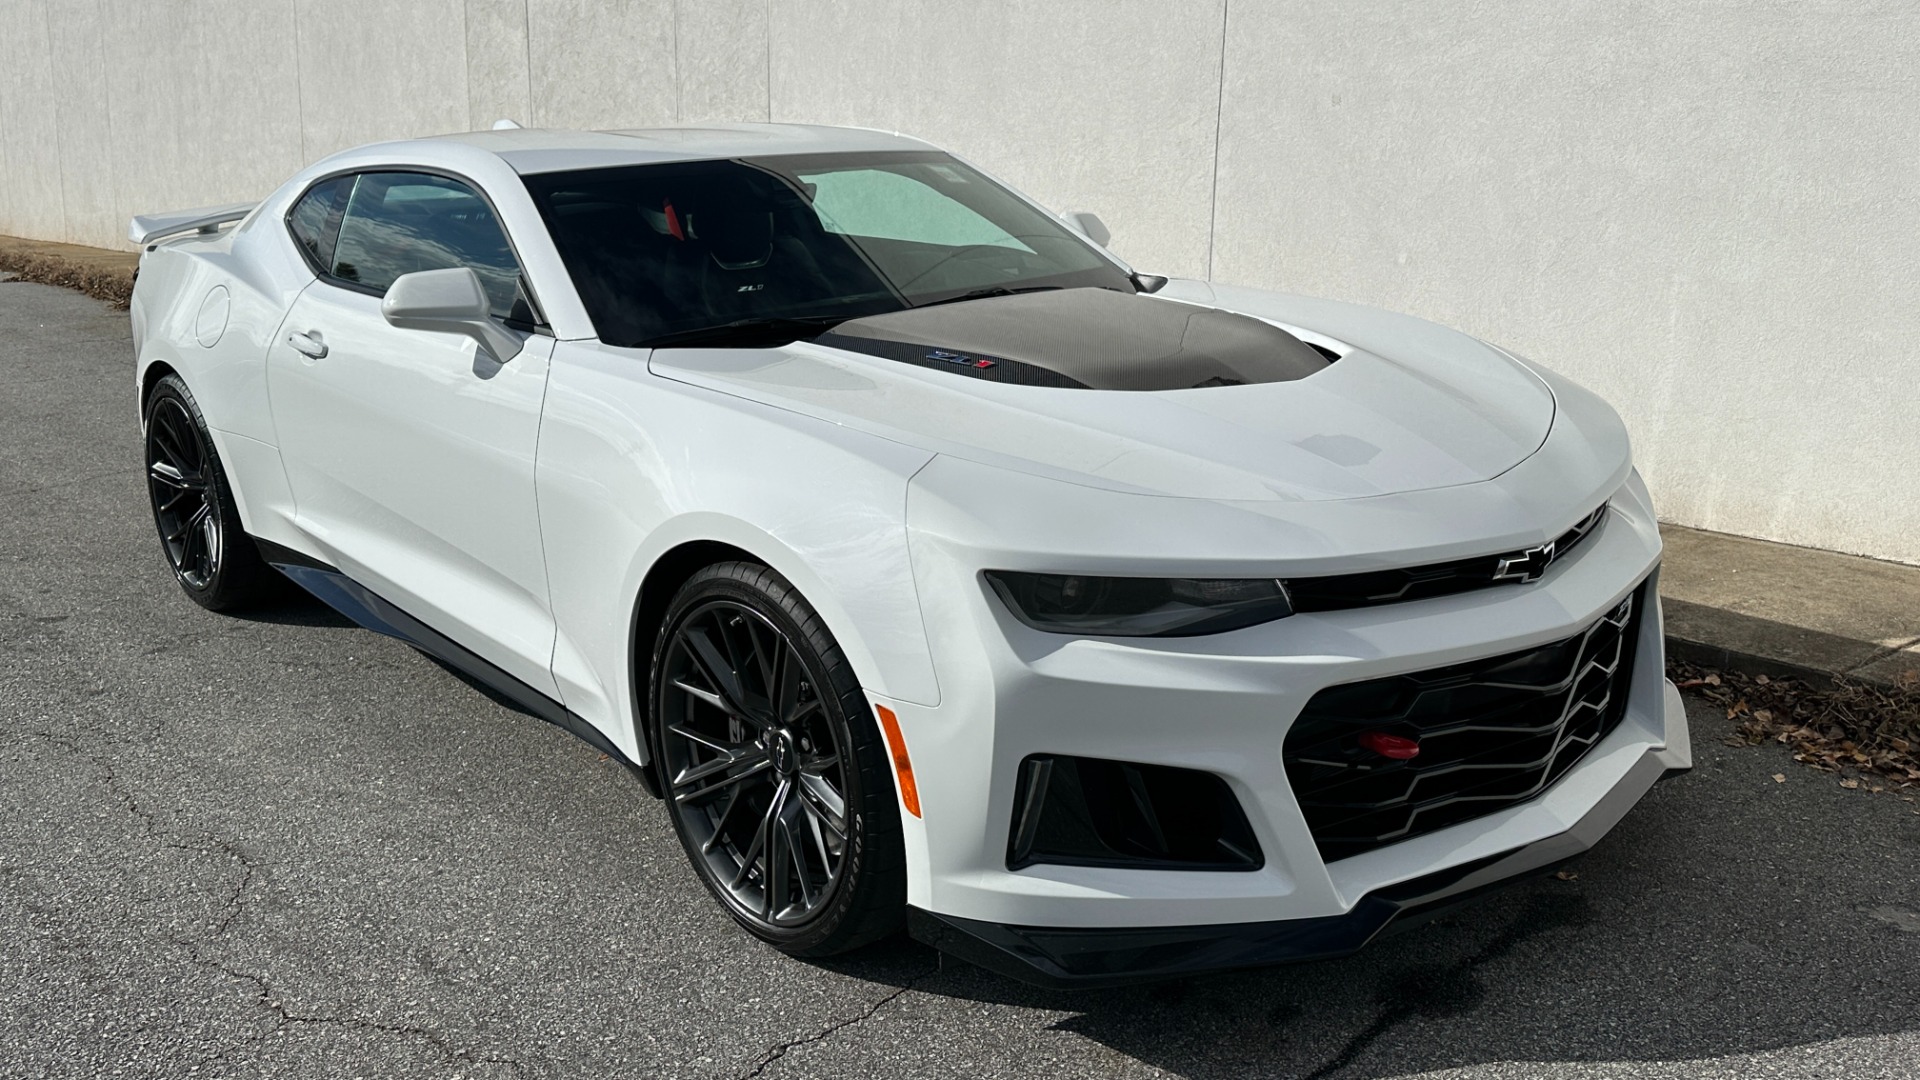 Used 2020 Chevrolet Camaro ZL1 / SUPERCHARGED / CARBON FIBER / RED SEAT BELTS / RECARO SEATING / 10SPD for sale $66,995 at Formula Imports in Charlotte NC 28227 7